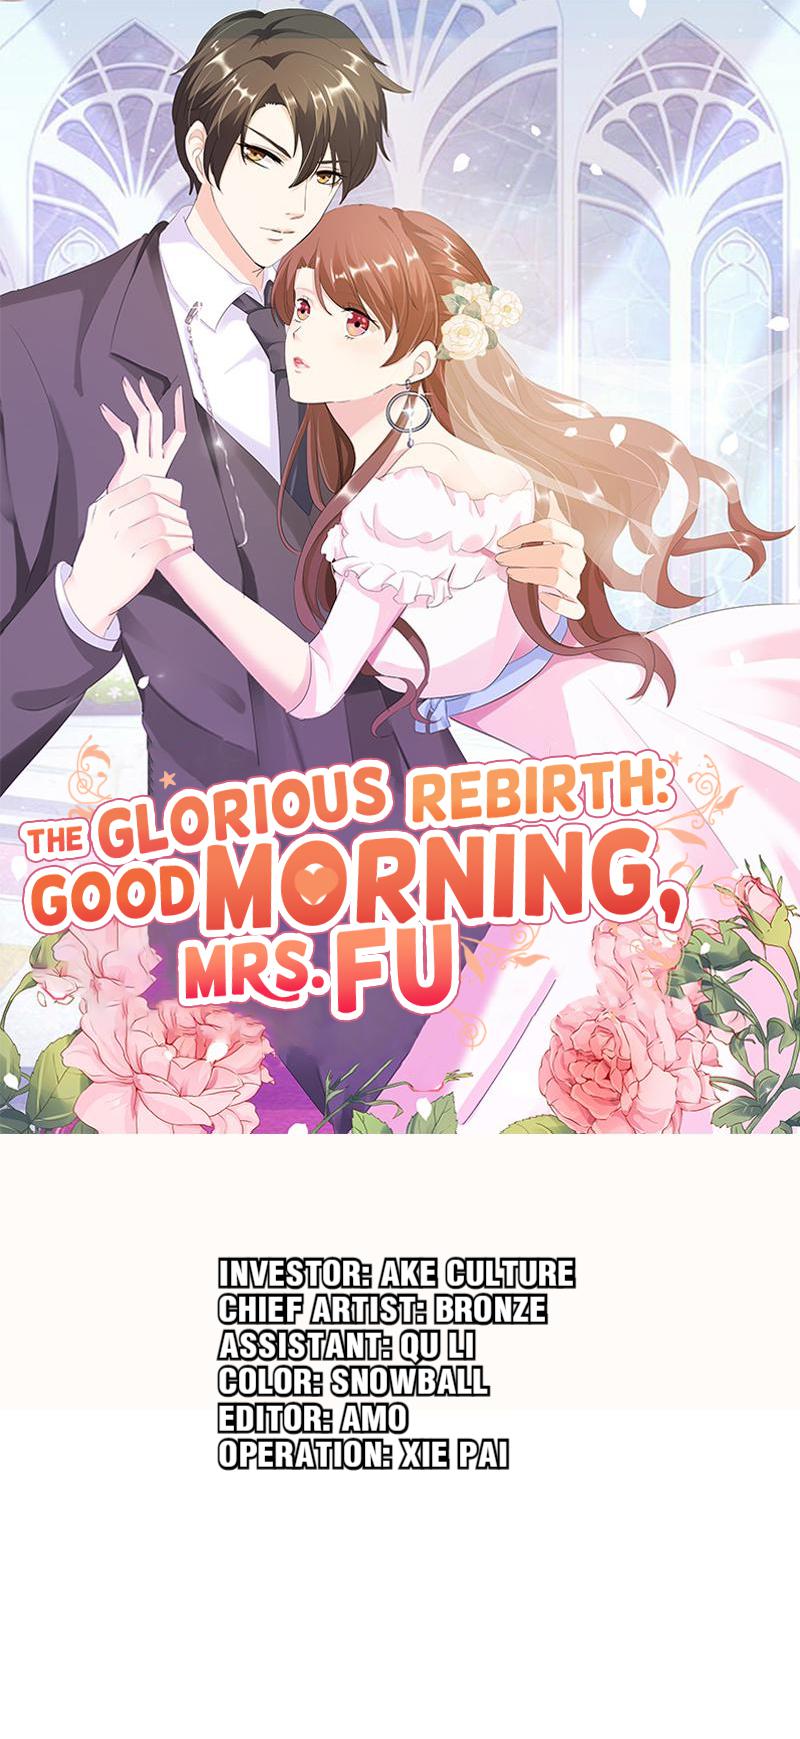 The Glorious Rebirth: Good Morning, Mrs. Fu - Page 1